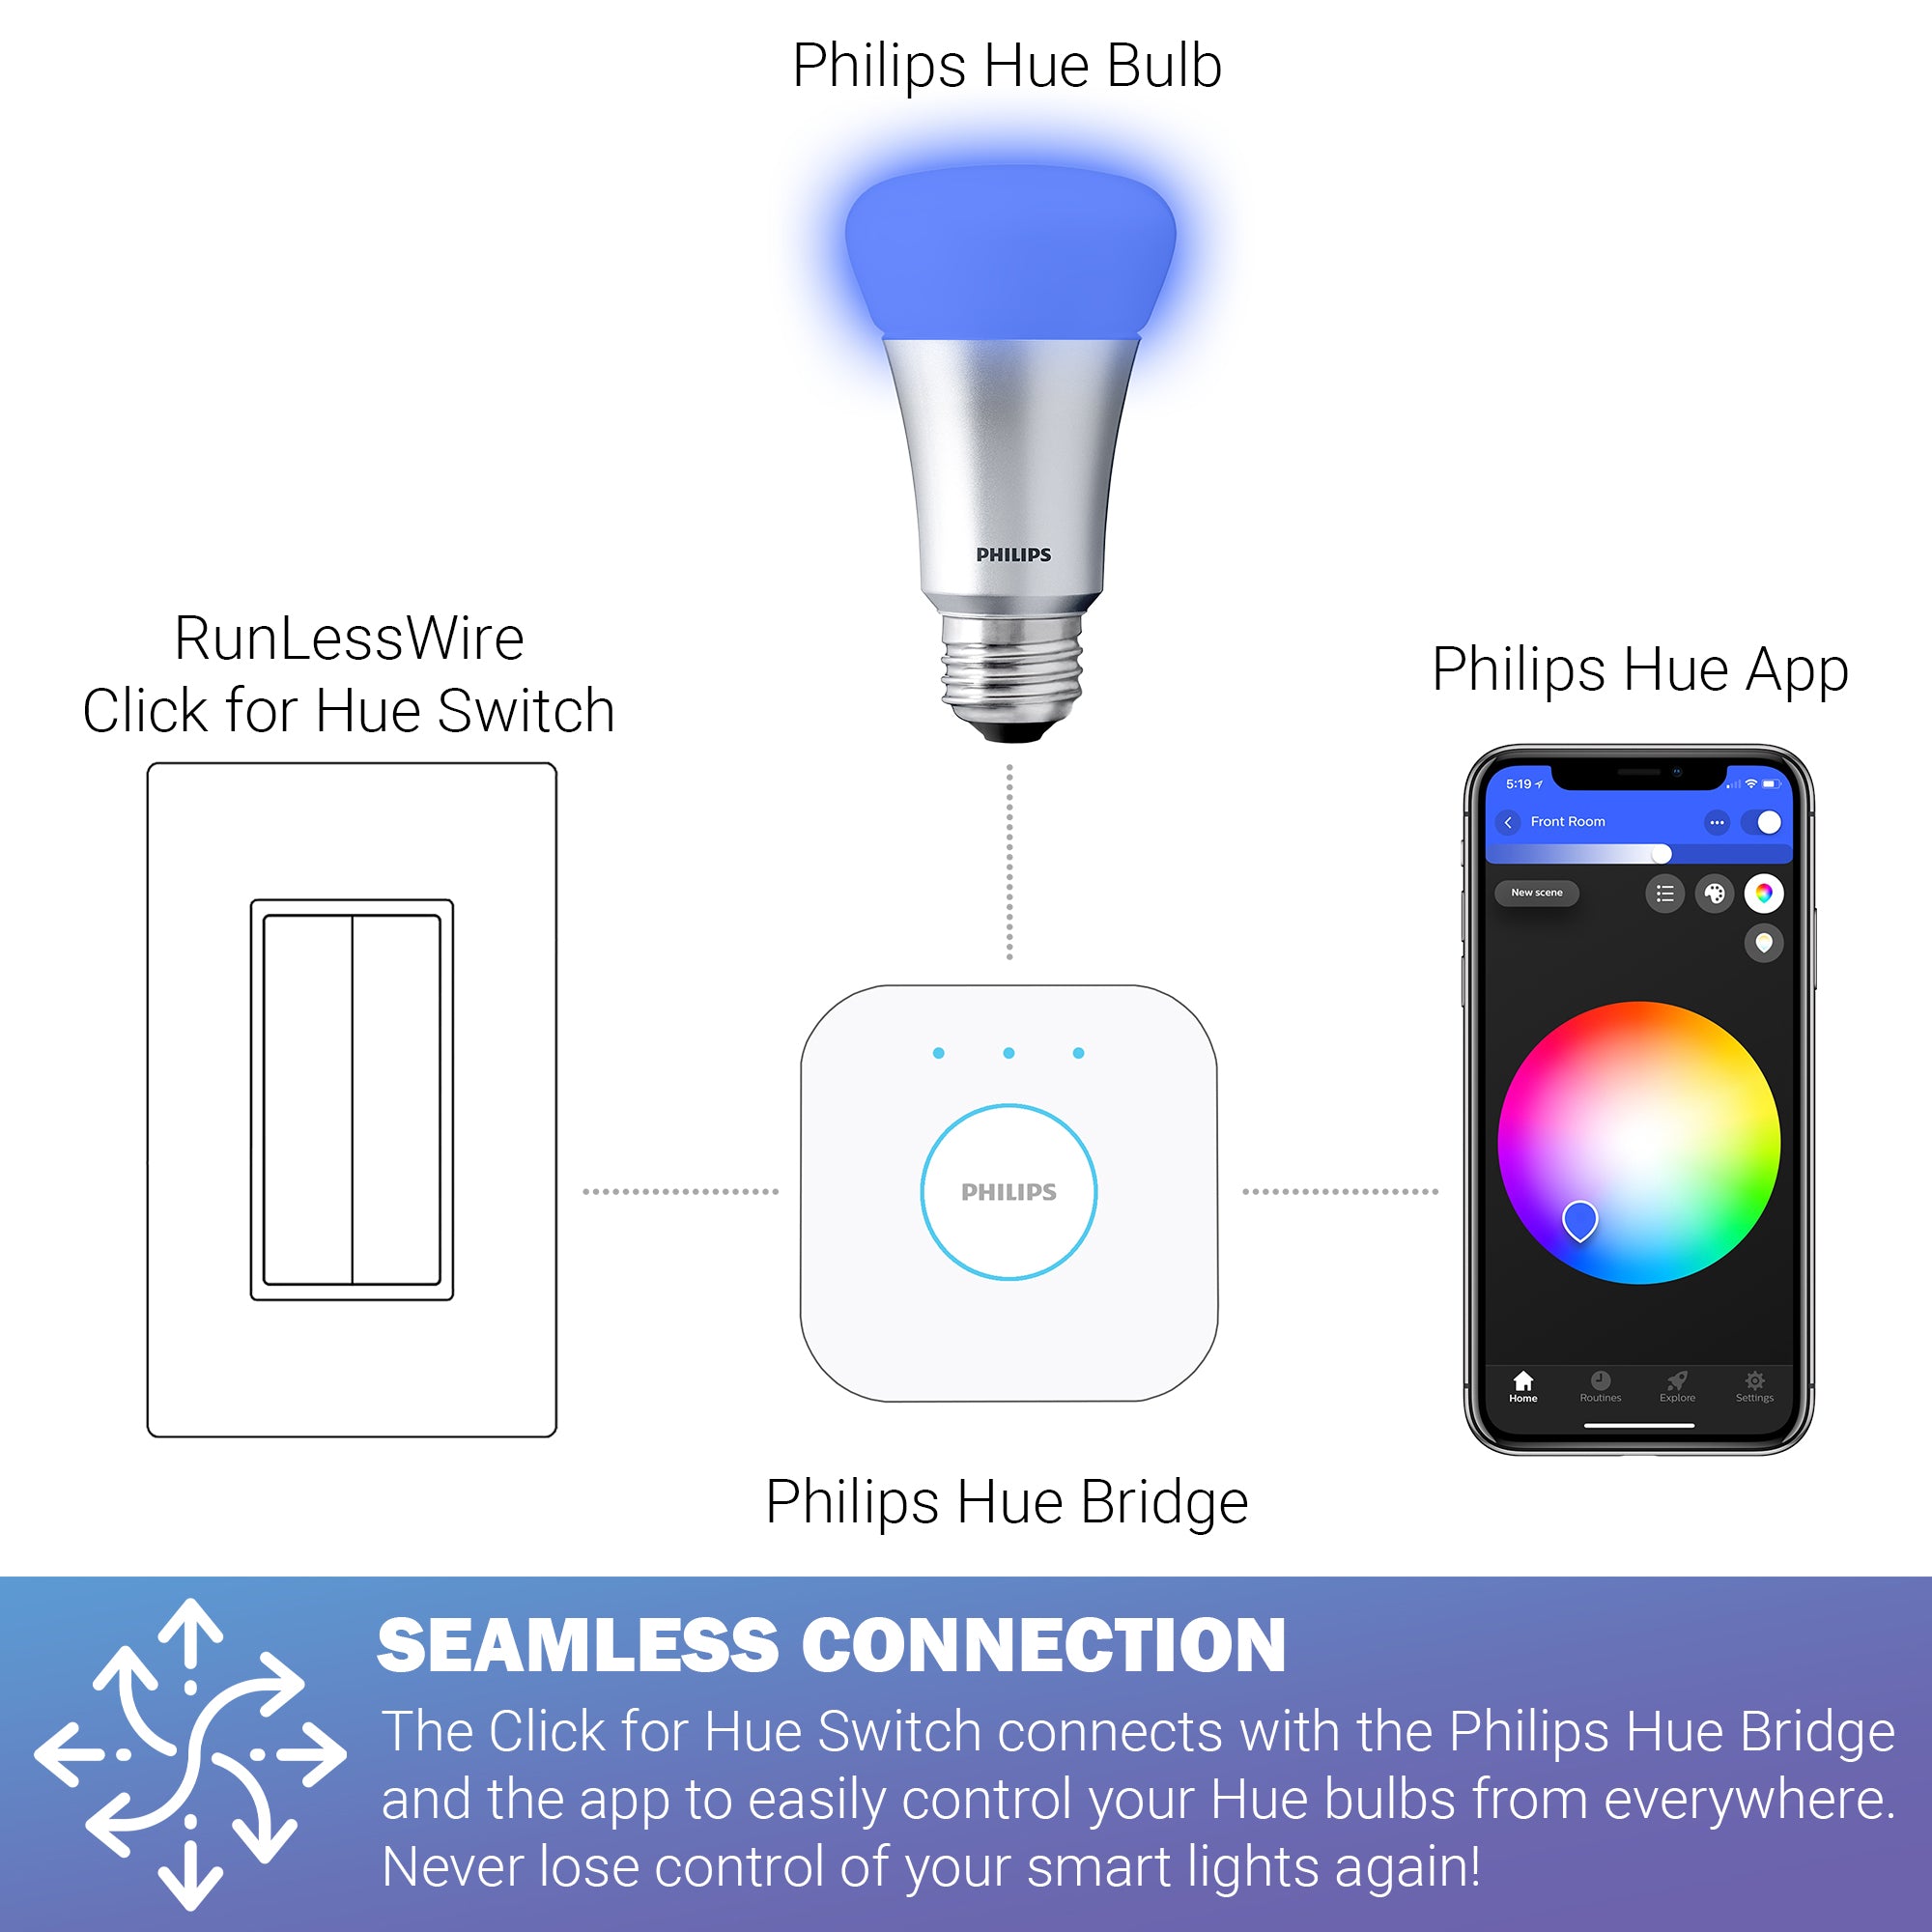 CLICK FOR PHILIPS HUE